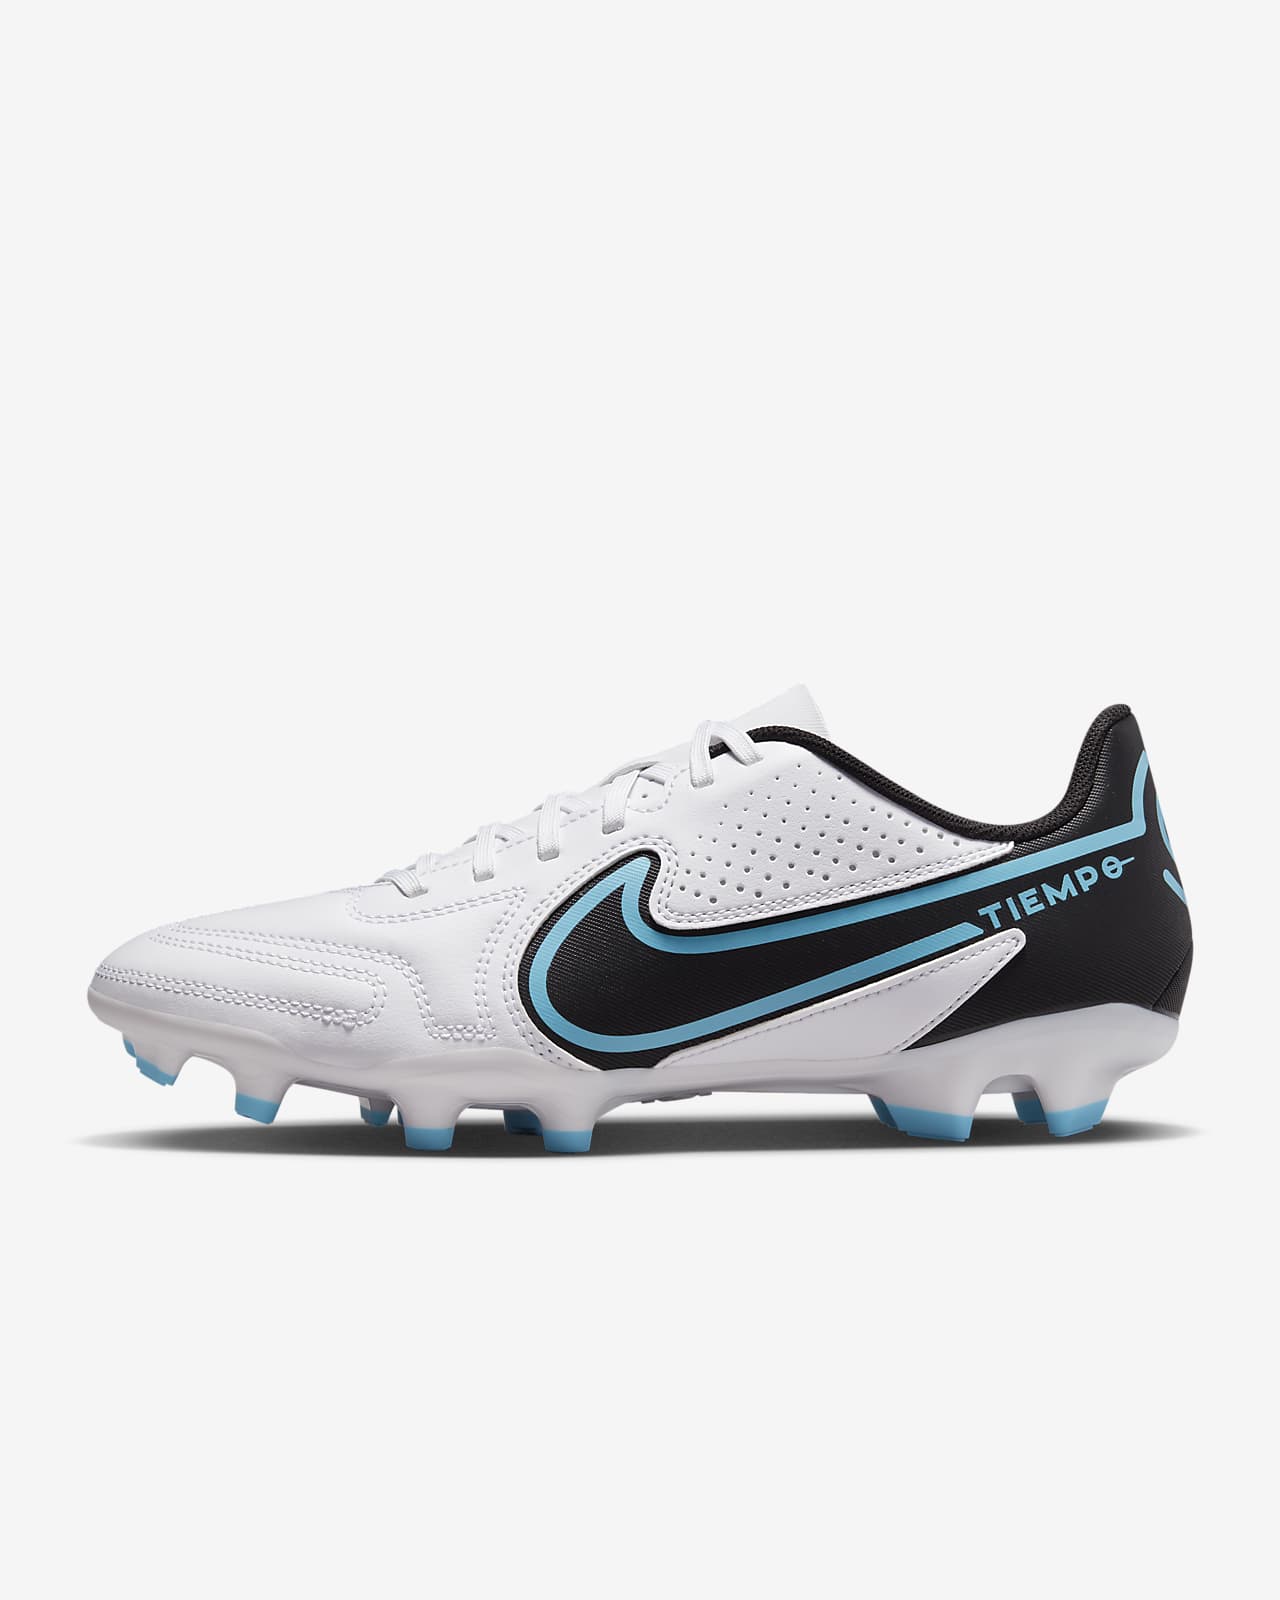 Overtuiging Tochi boom is er Nike Tiempo Legend 9 Club MG Multi-Ground Soccer Cleats. Nike.com